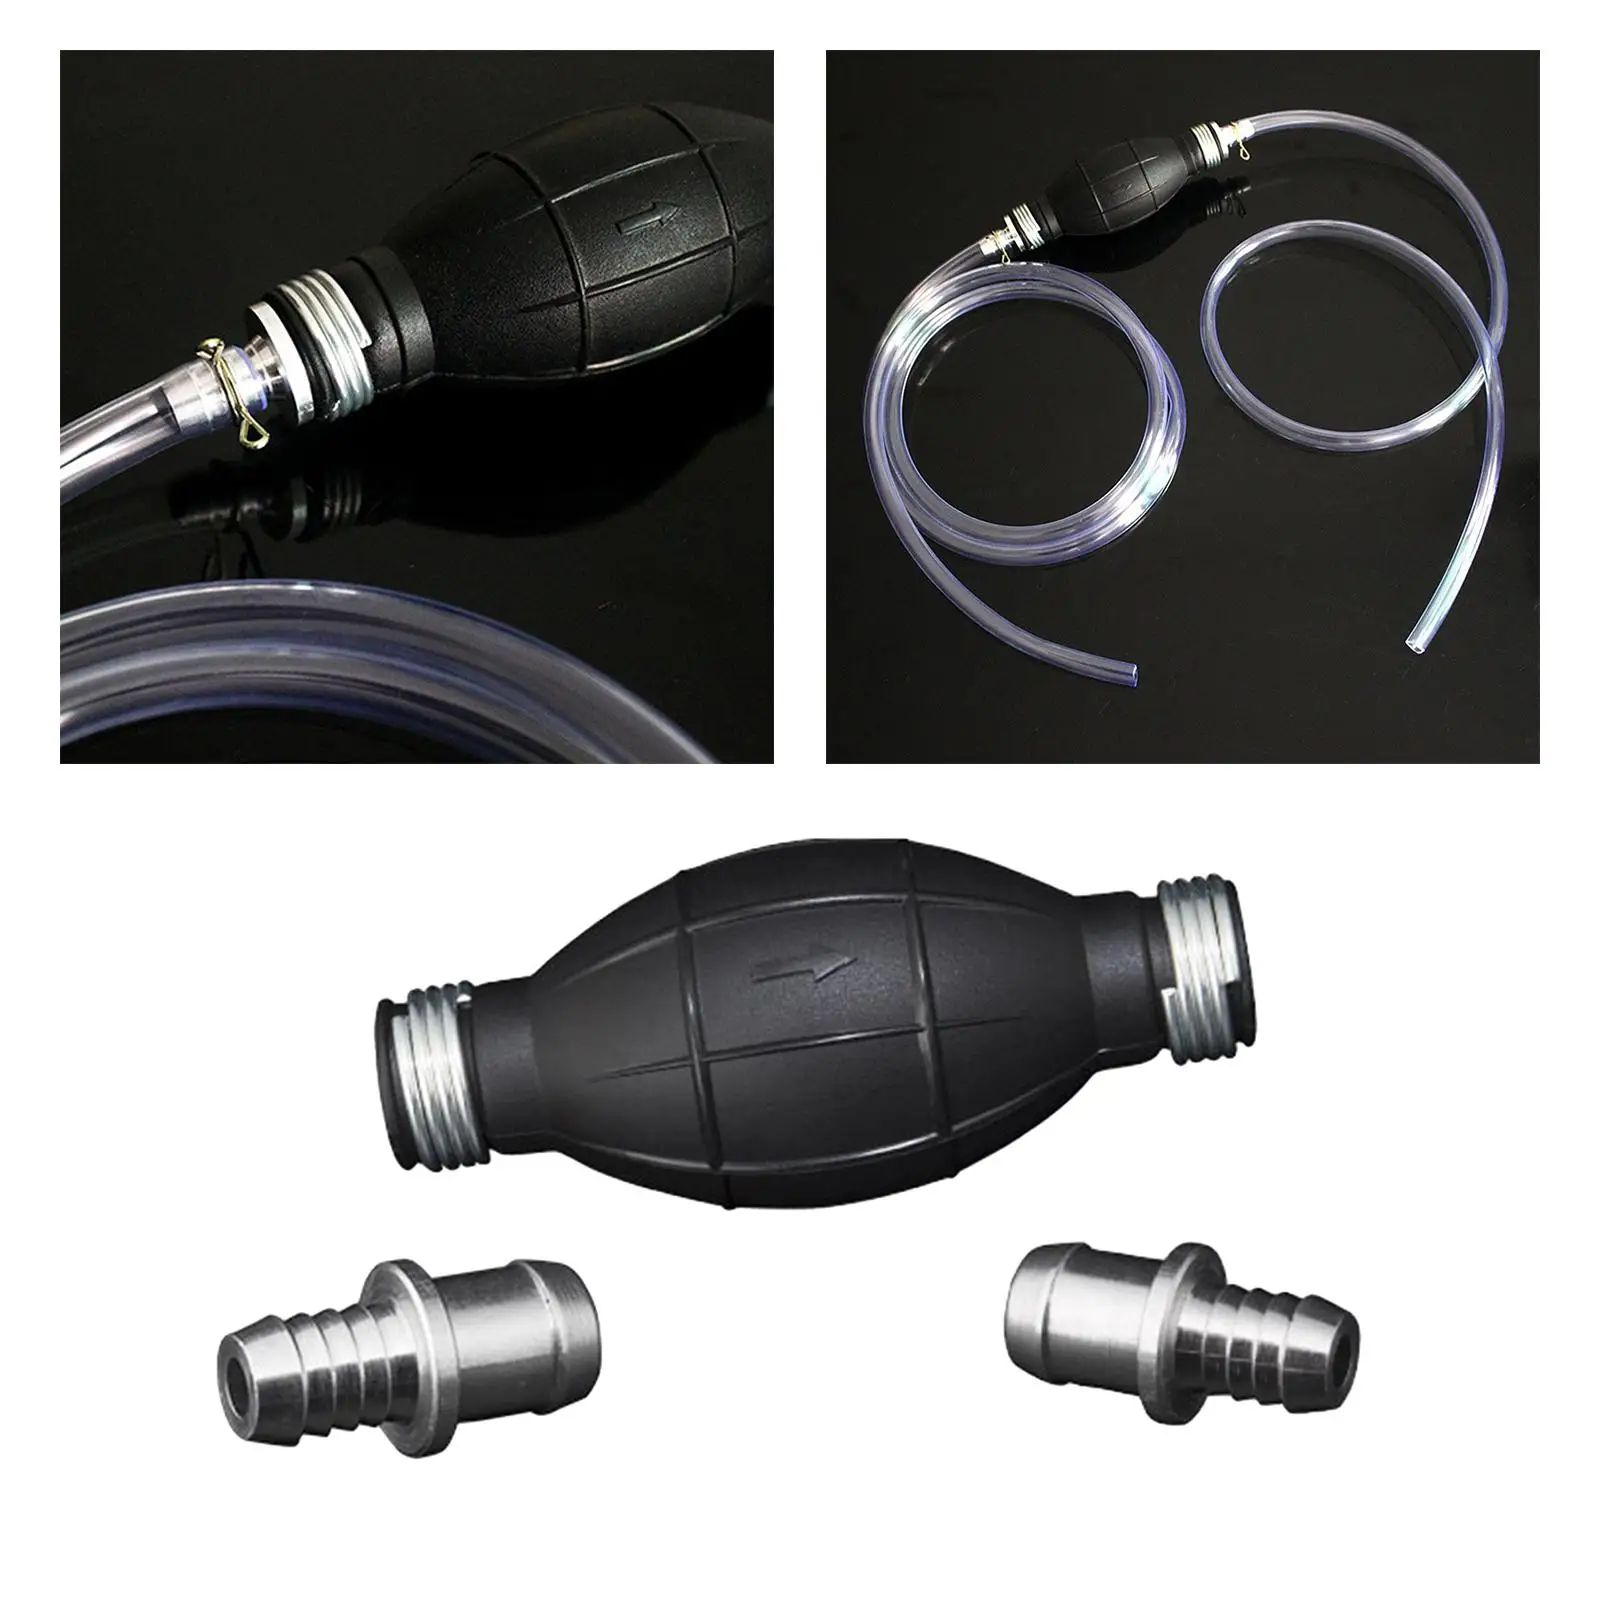 Gasoline Siphon Hose Pump, with 2, Siphon Pump, Gas Transfer Pump, Easy to Use